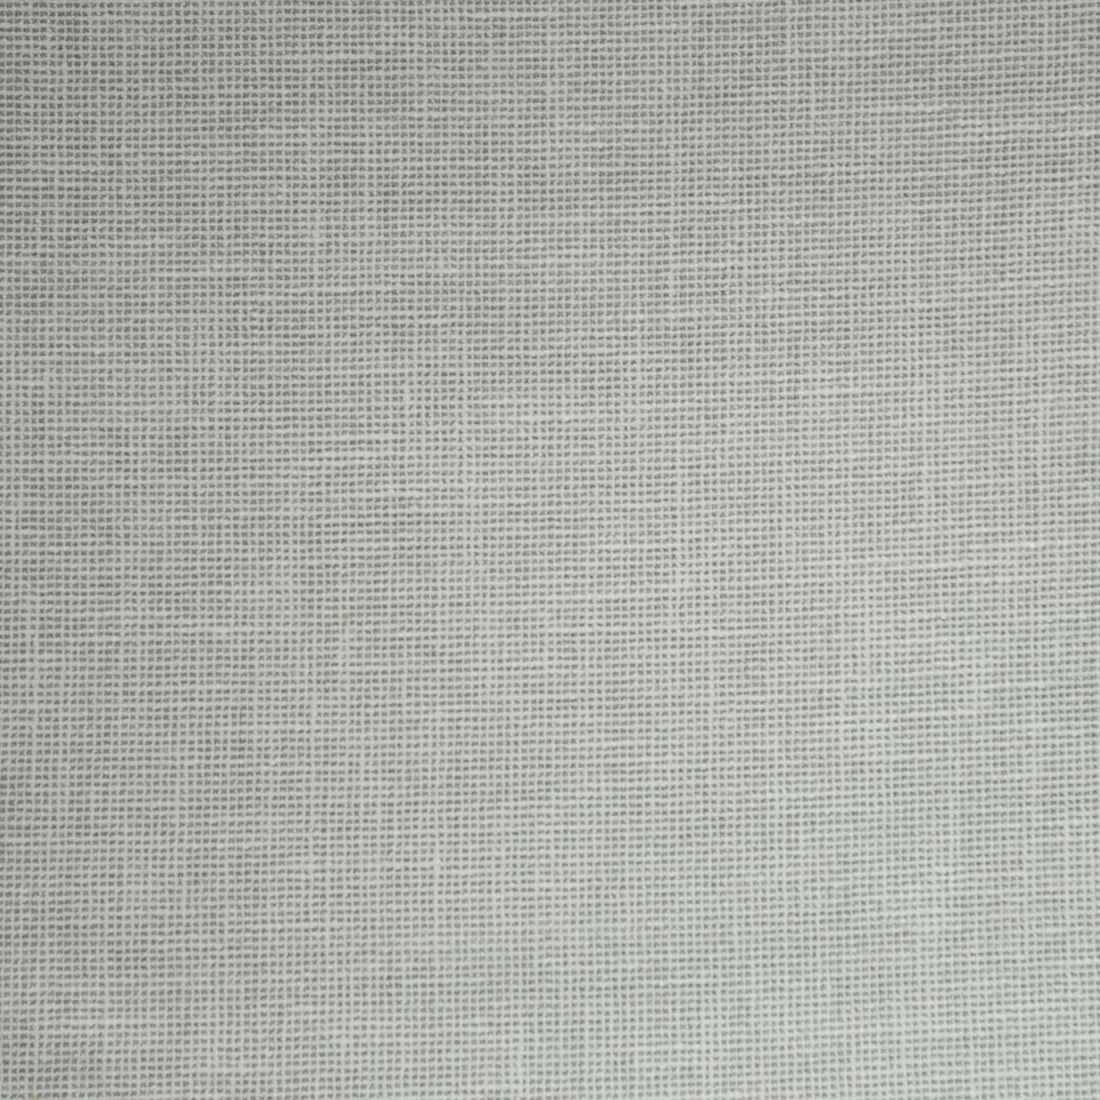 Skiffle fabric in grey color - pattern 34449.11.0 - by Kravet Couture in the Modern Colors-Sojourn Collection collection